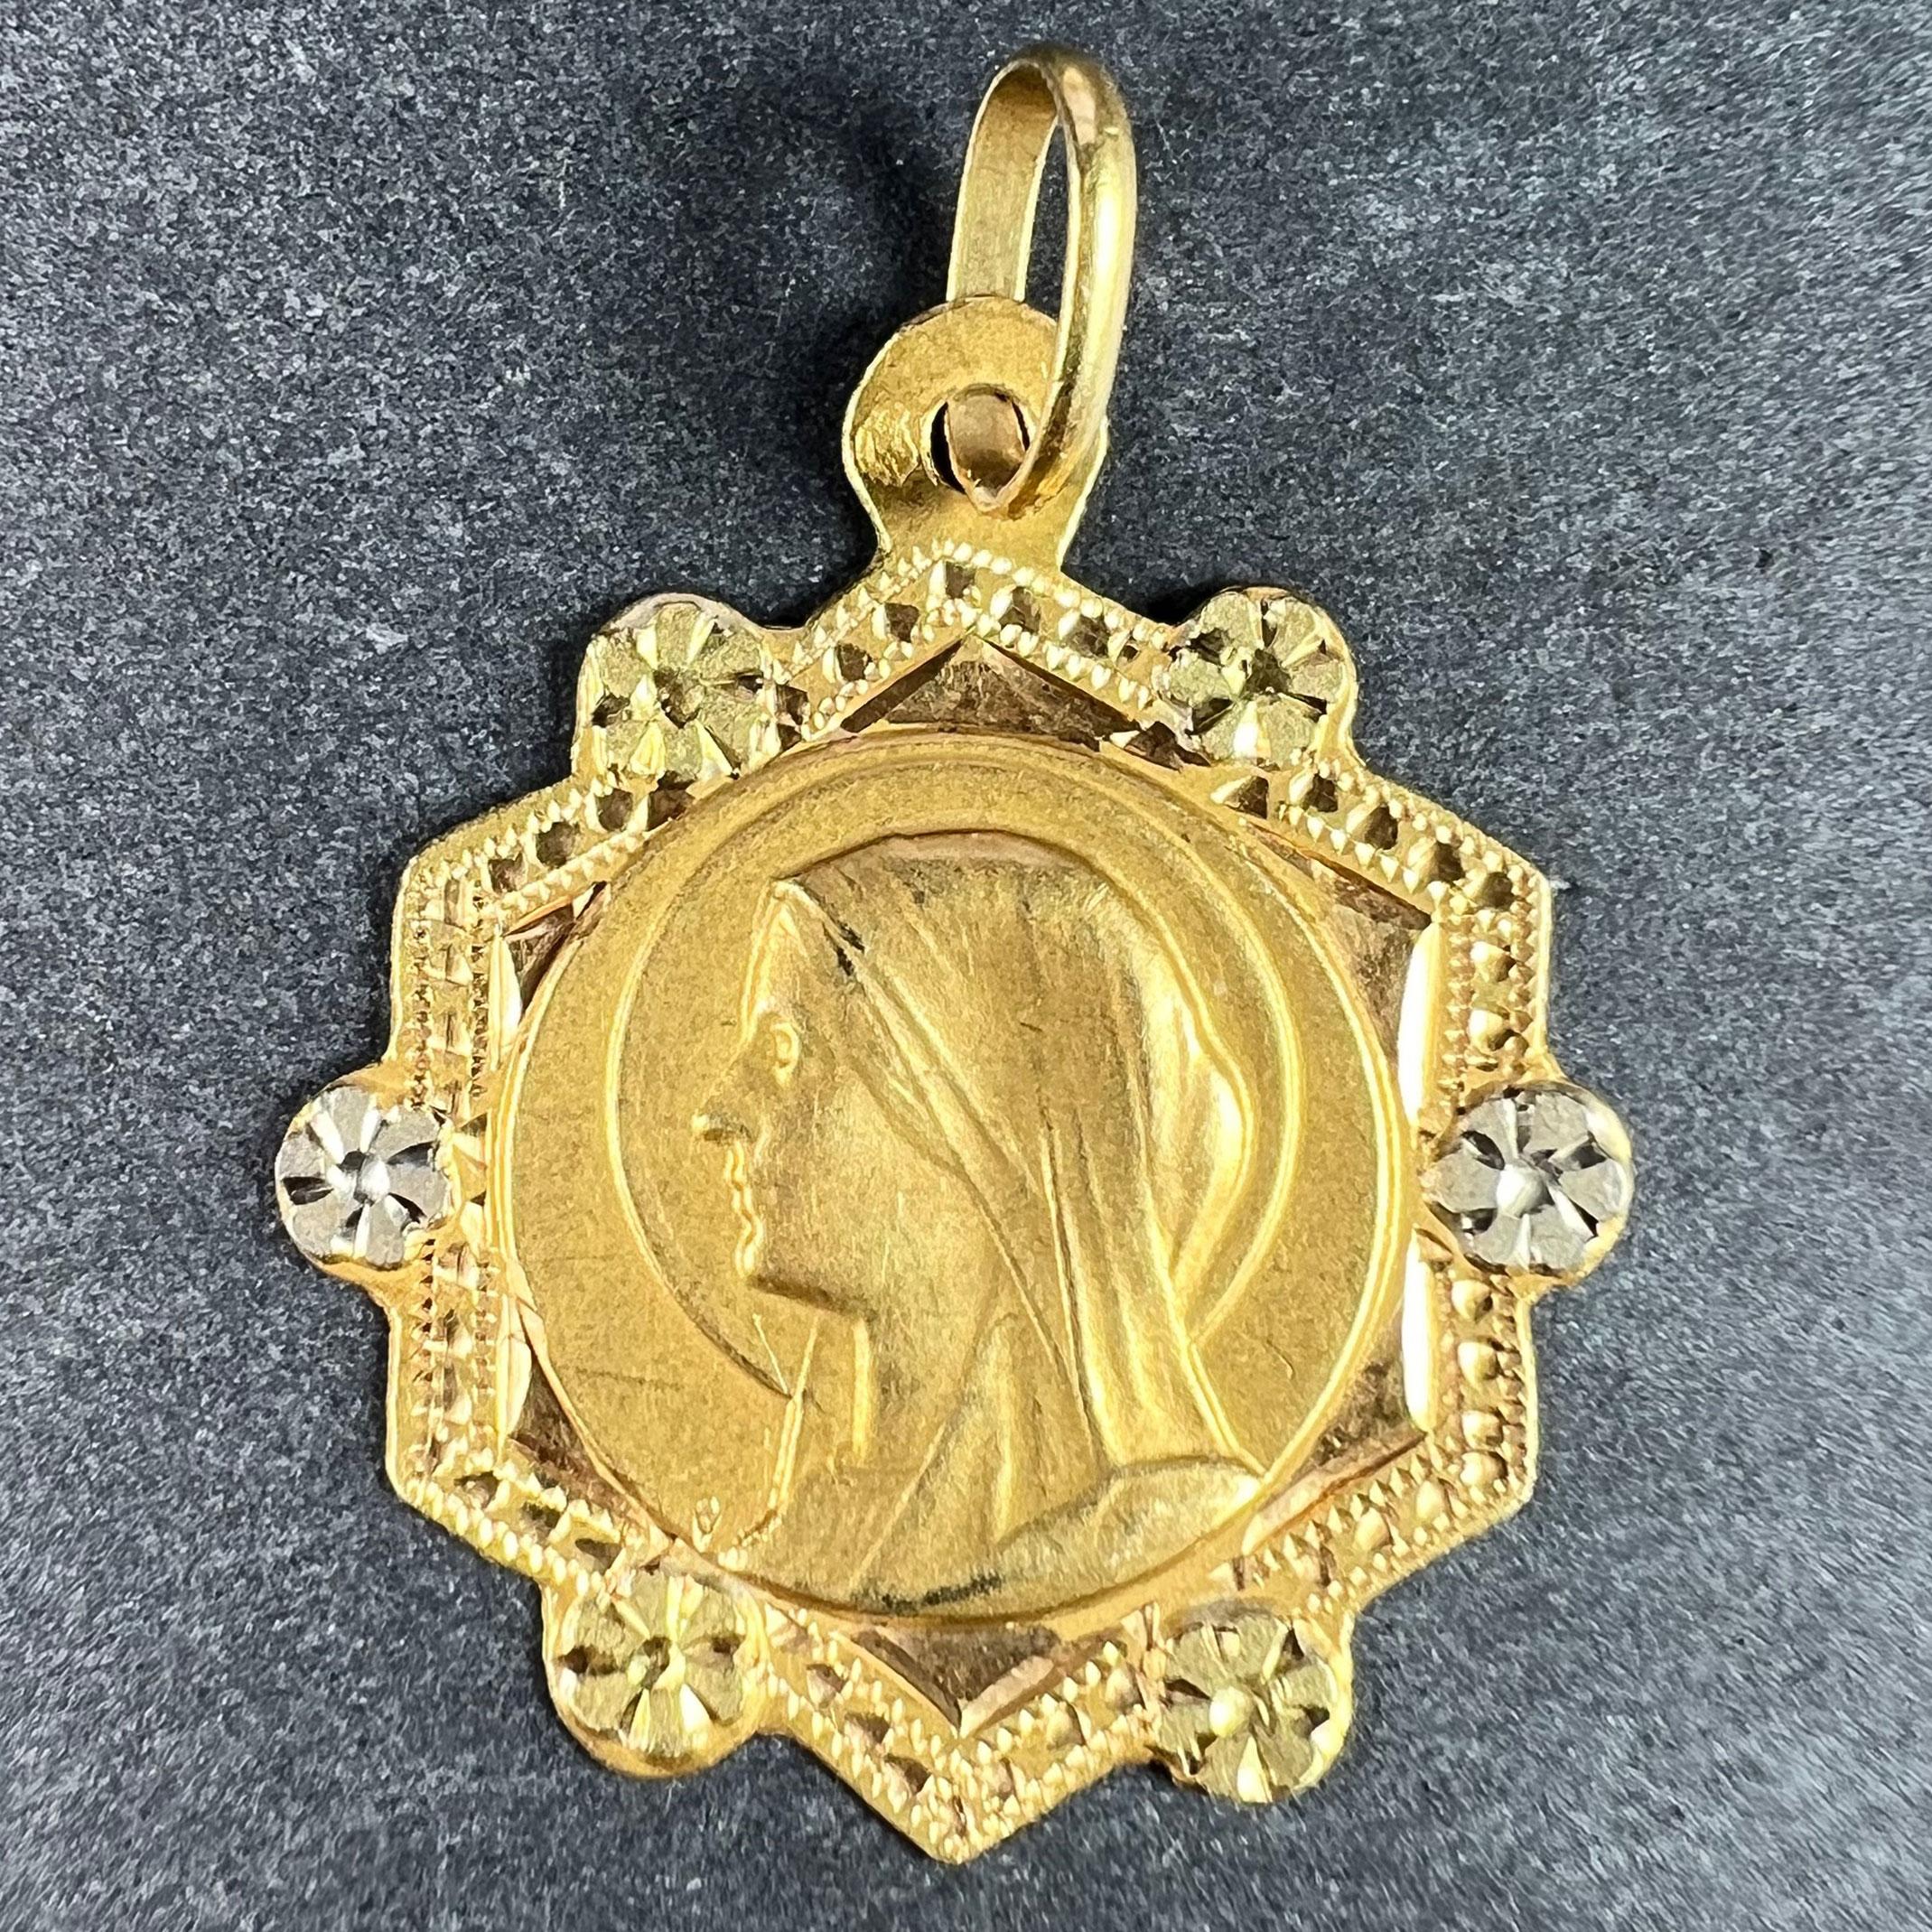 A French 18 karat (18K) yellow gold charm pendant designed as a hexagonal medal depicting the Virgin Mary with alternating rosettes of white and yellow gold to the edges. Engraved to the reverse ‘Anne-Marie Moreau nee le 21 Septembre 1930’. Stamped